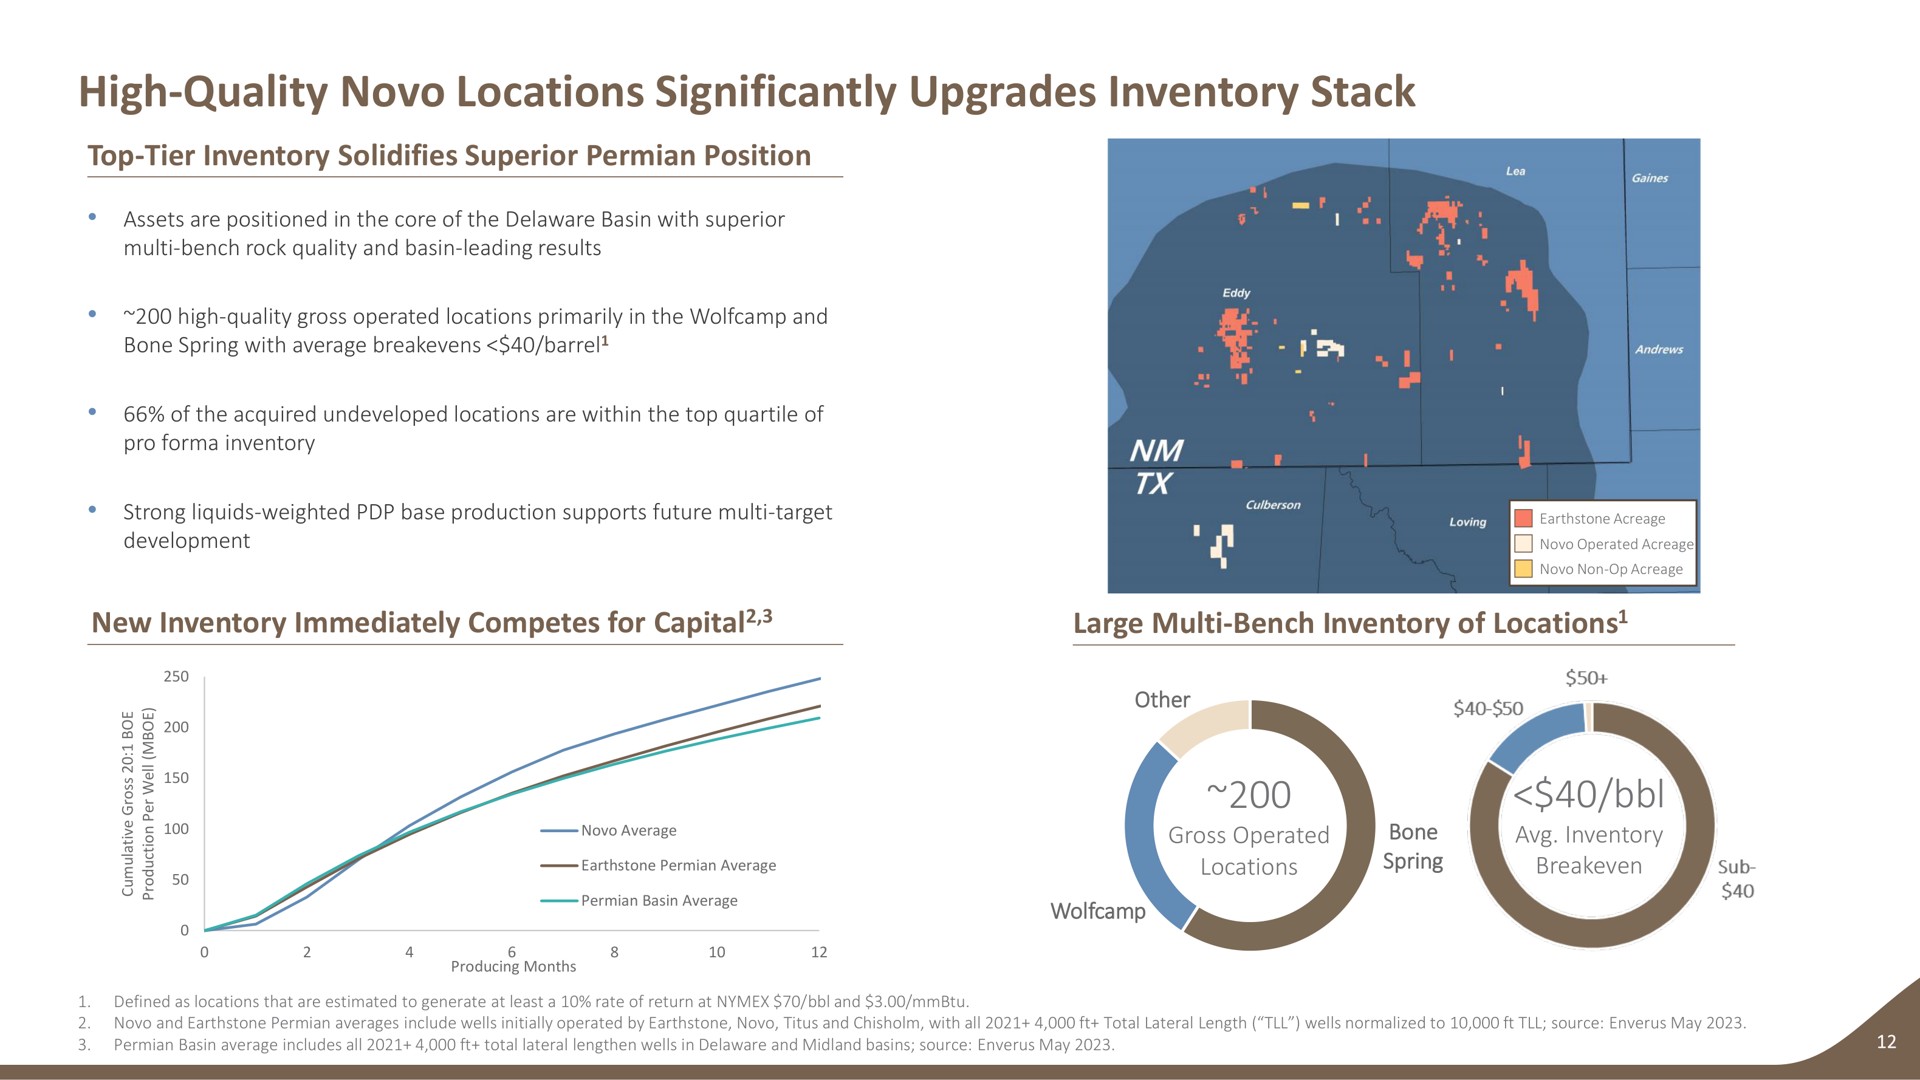 high quality locations significantly upgrades inventory stack top tier inventory solidifies superior position new inventory immediately competes for capital large bench inventory of locations strong liquids weighted base production supports future target i acreage capital as average gross operated | Earthstone Energy